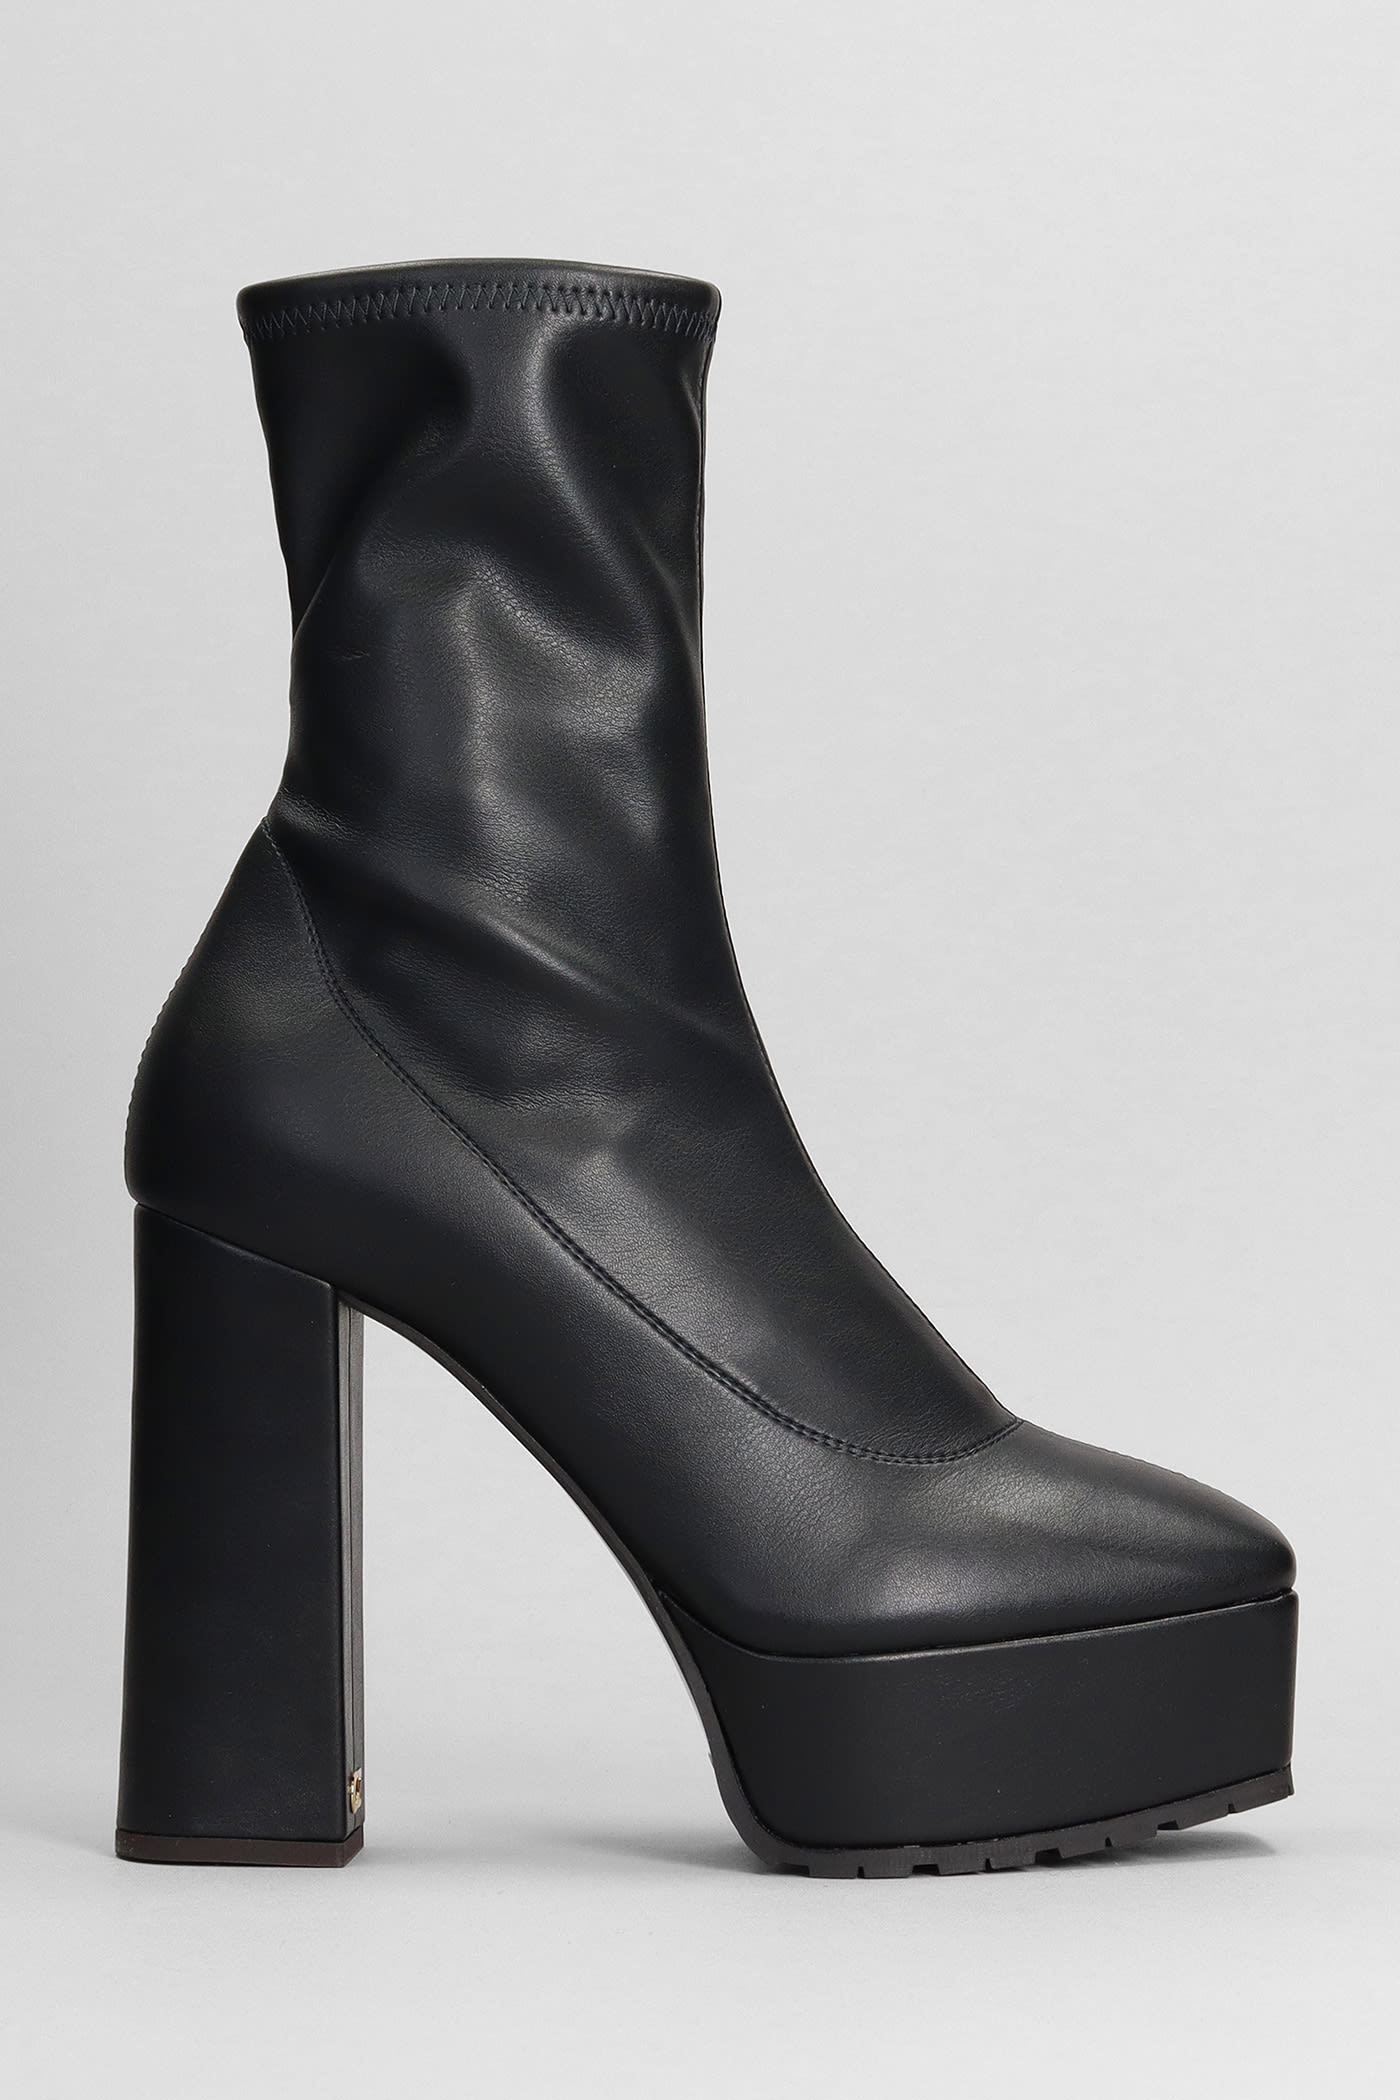 GIUSEPPE ZANOTTI HIGH HEELS ANKLE BOOTS IN BLACK LEATHER